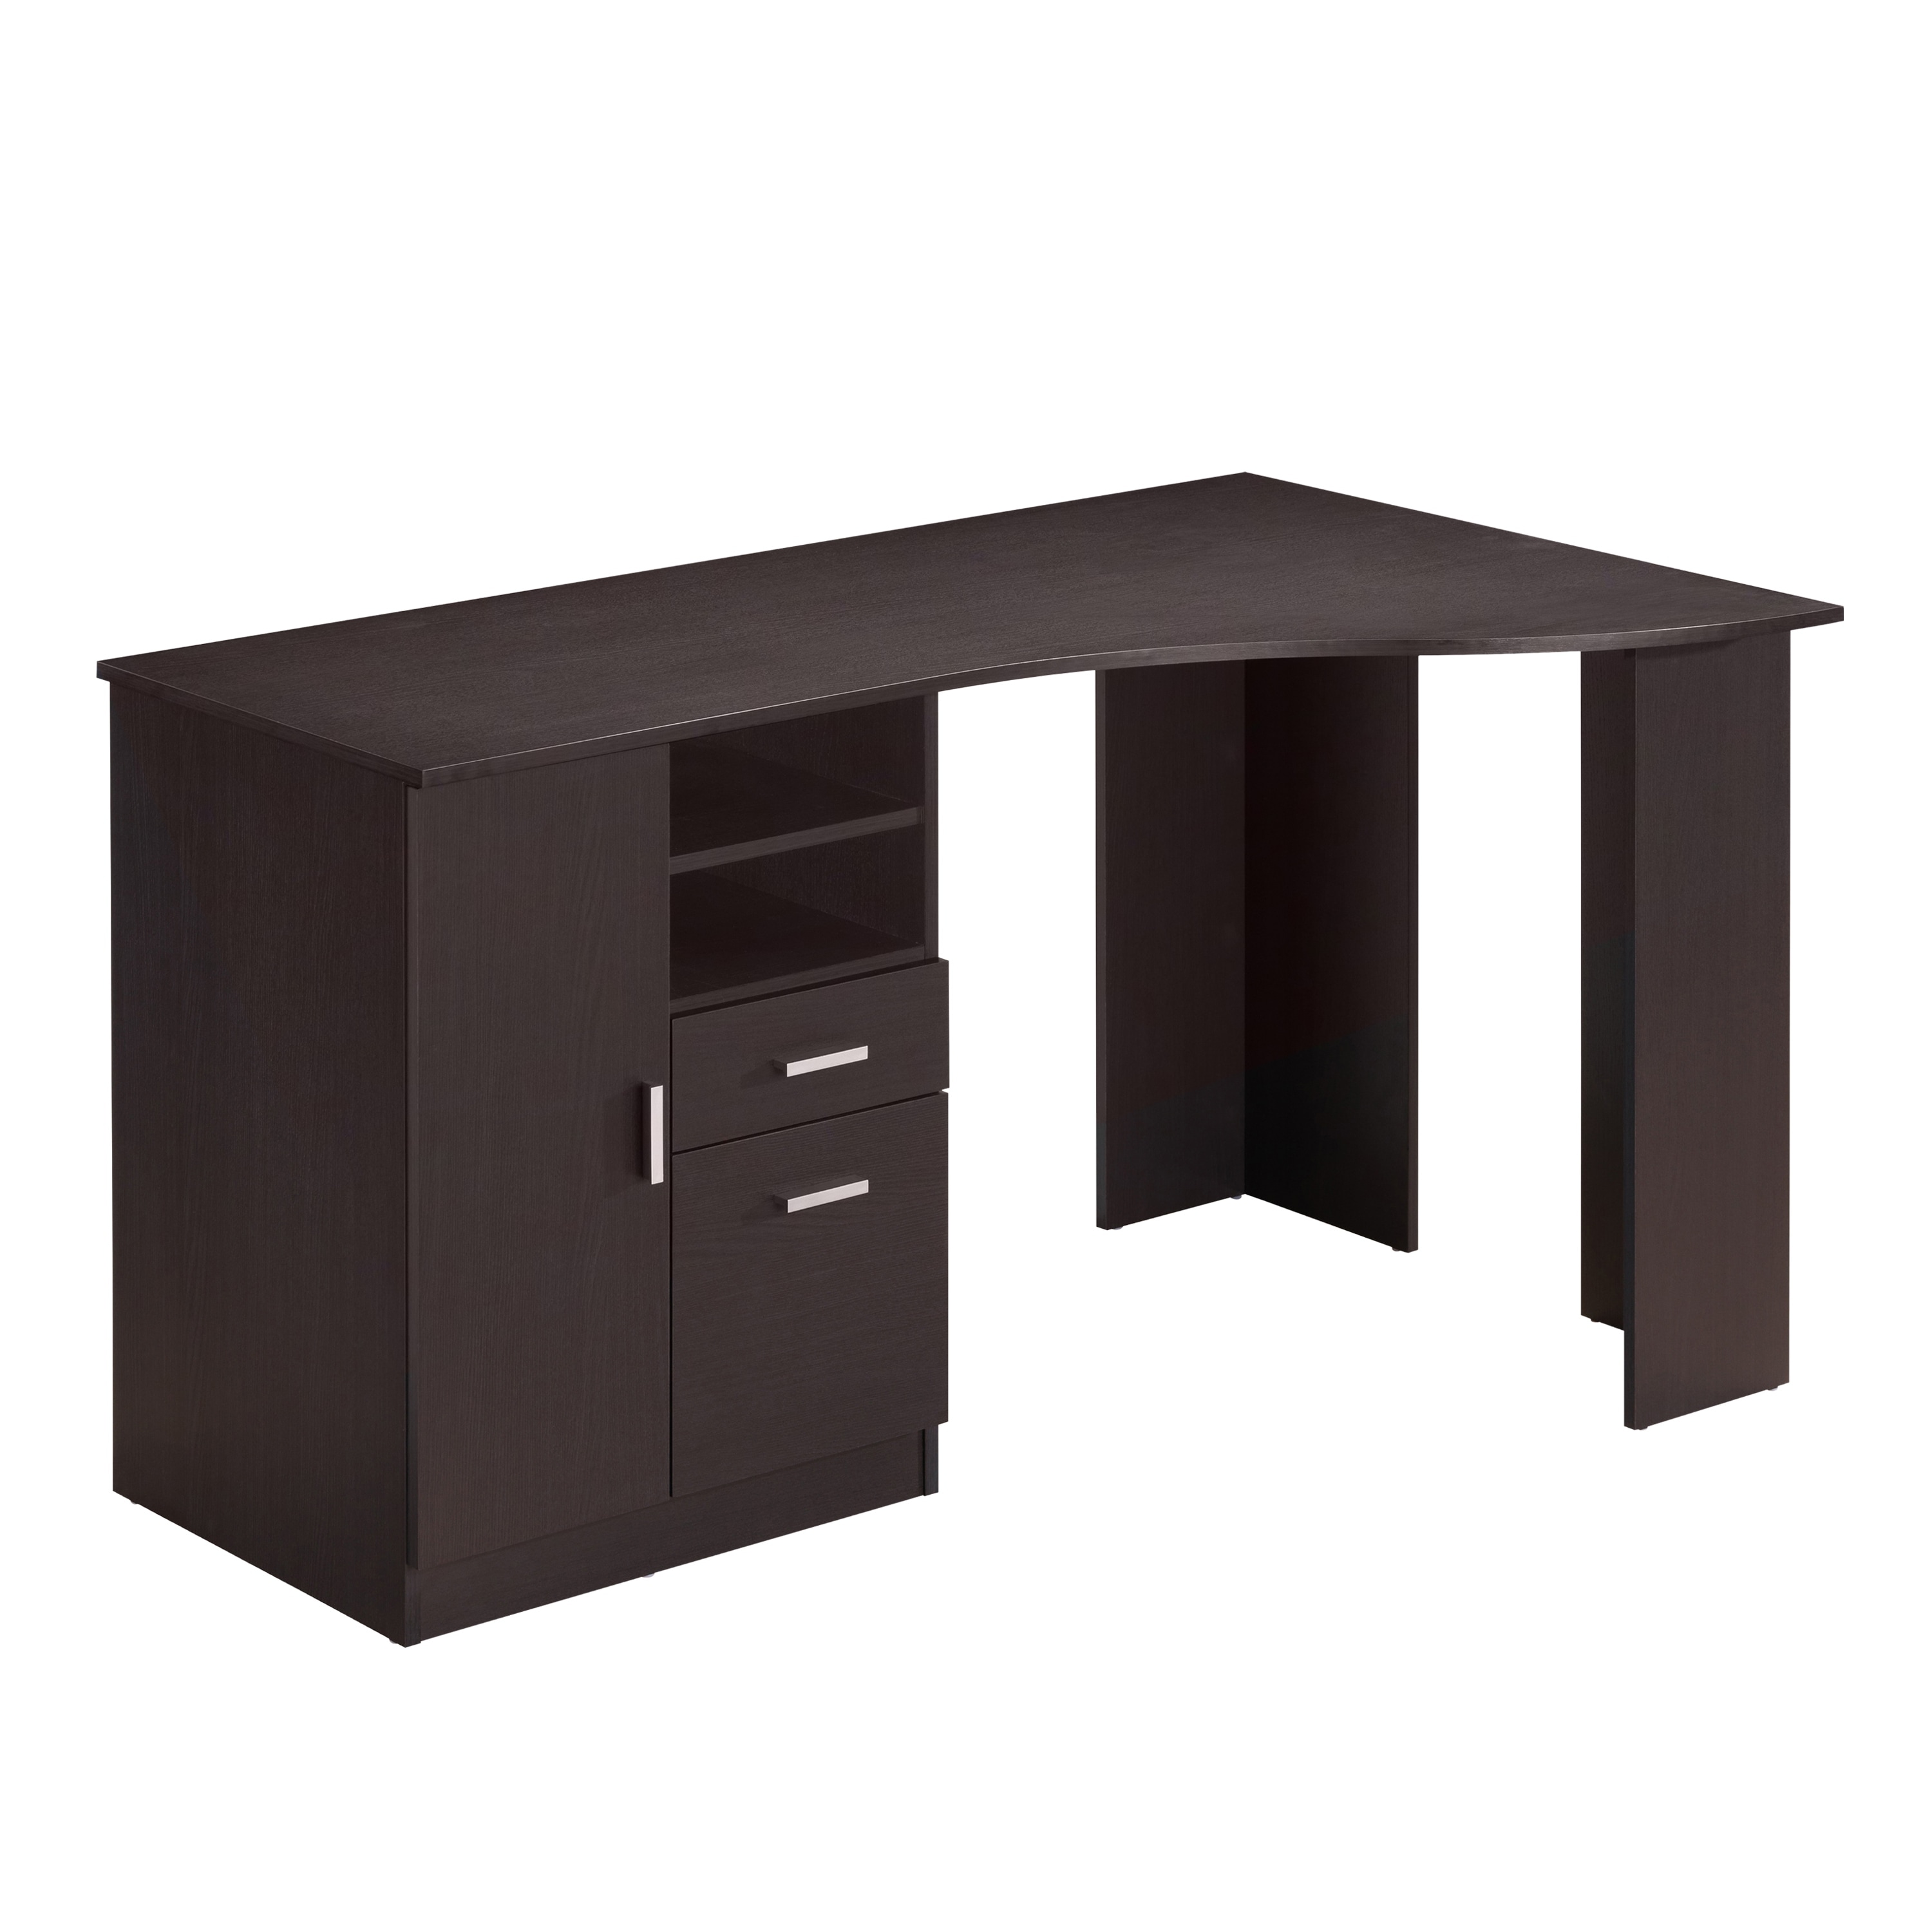 https://ak1.ostkcdn.com/images/products/is/images/direct/e41451b6e795dc55feb2b4d682663bcf9544da5c/51.25-Inch-Classic-Office-Desk-with-Open-Storage-Shelves%2C-2-Drawers-and-One-Storage-Door-Cabinet-for-Work-from-Home.jpg